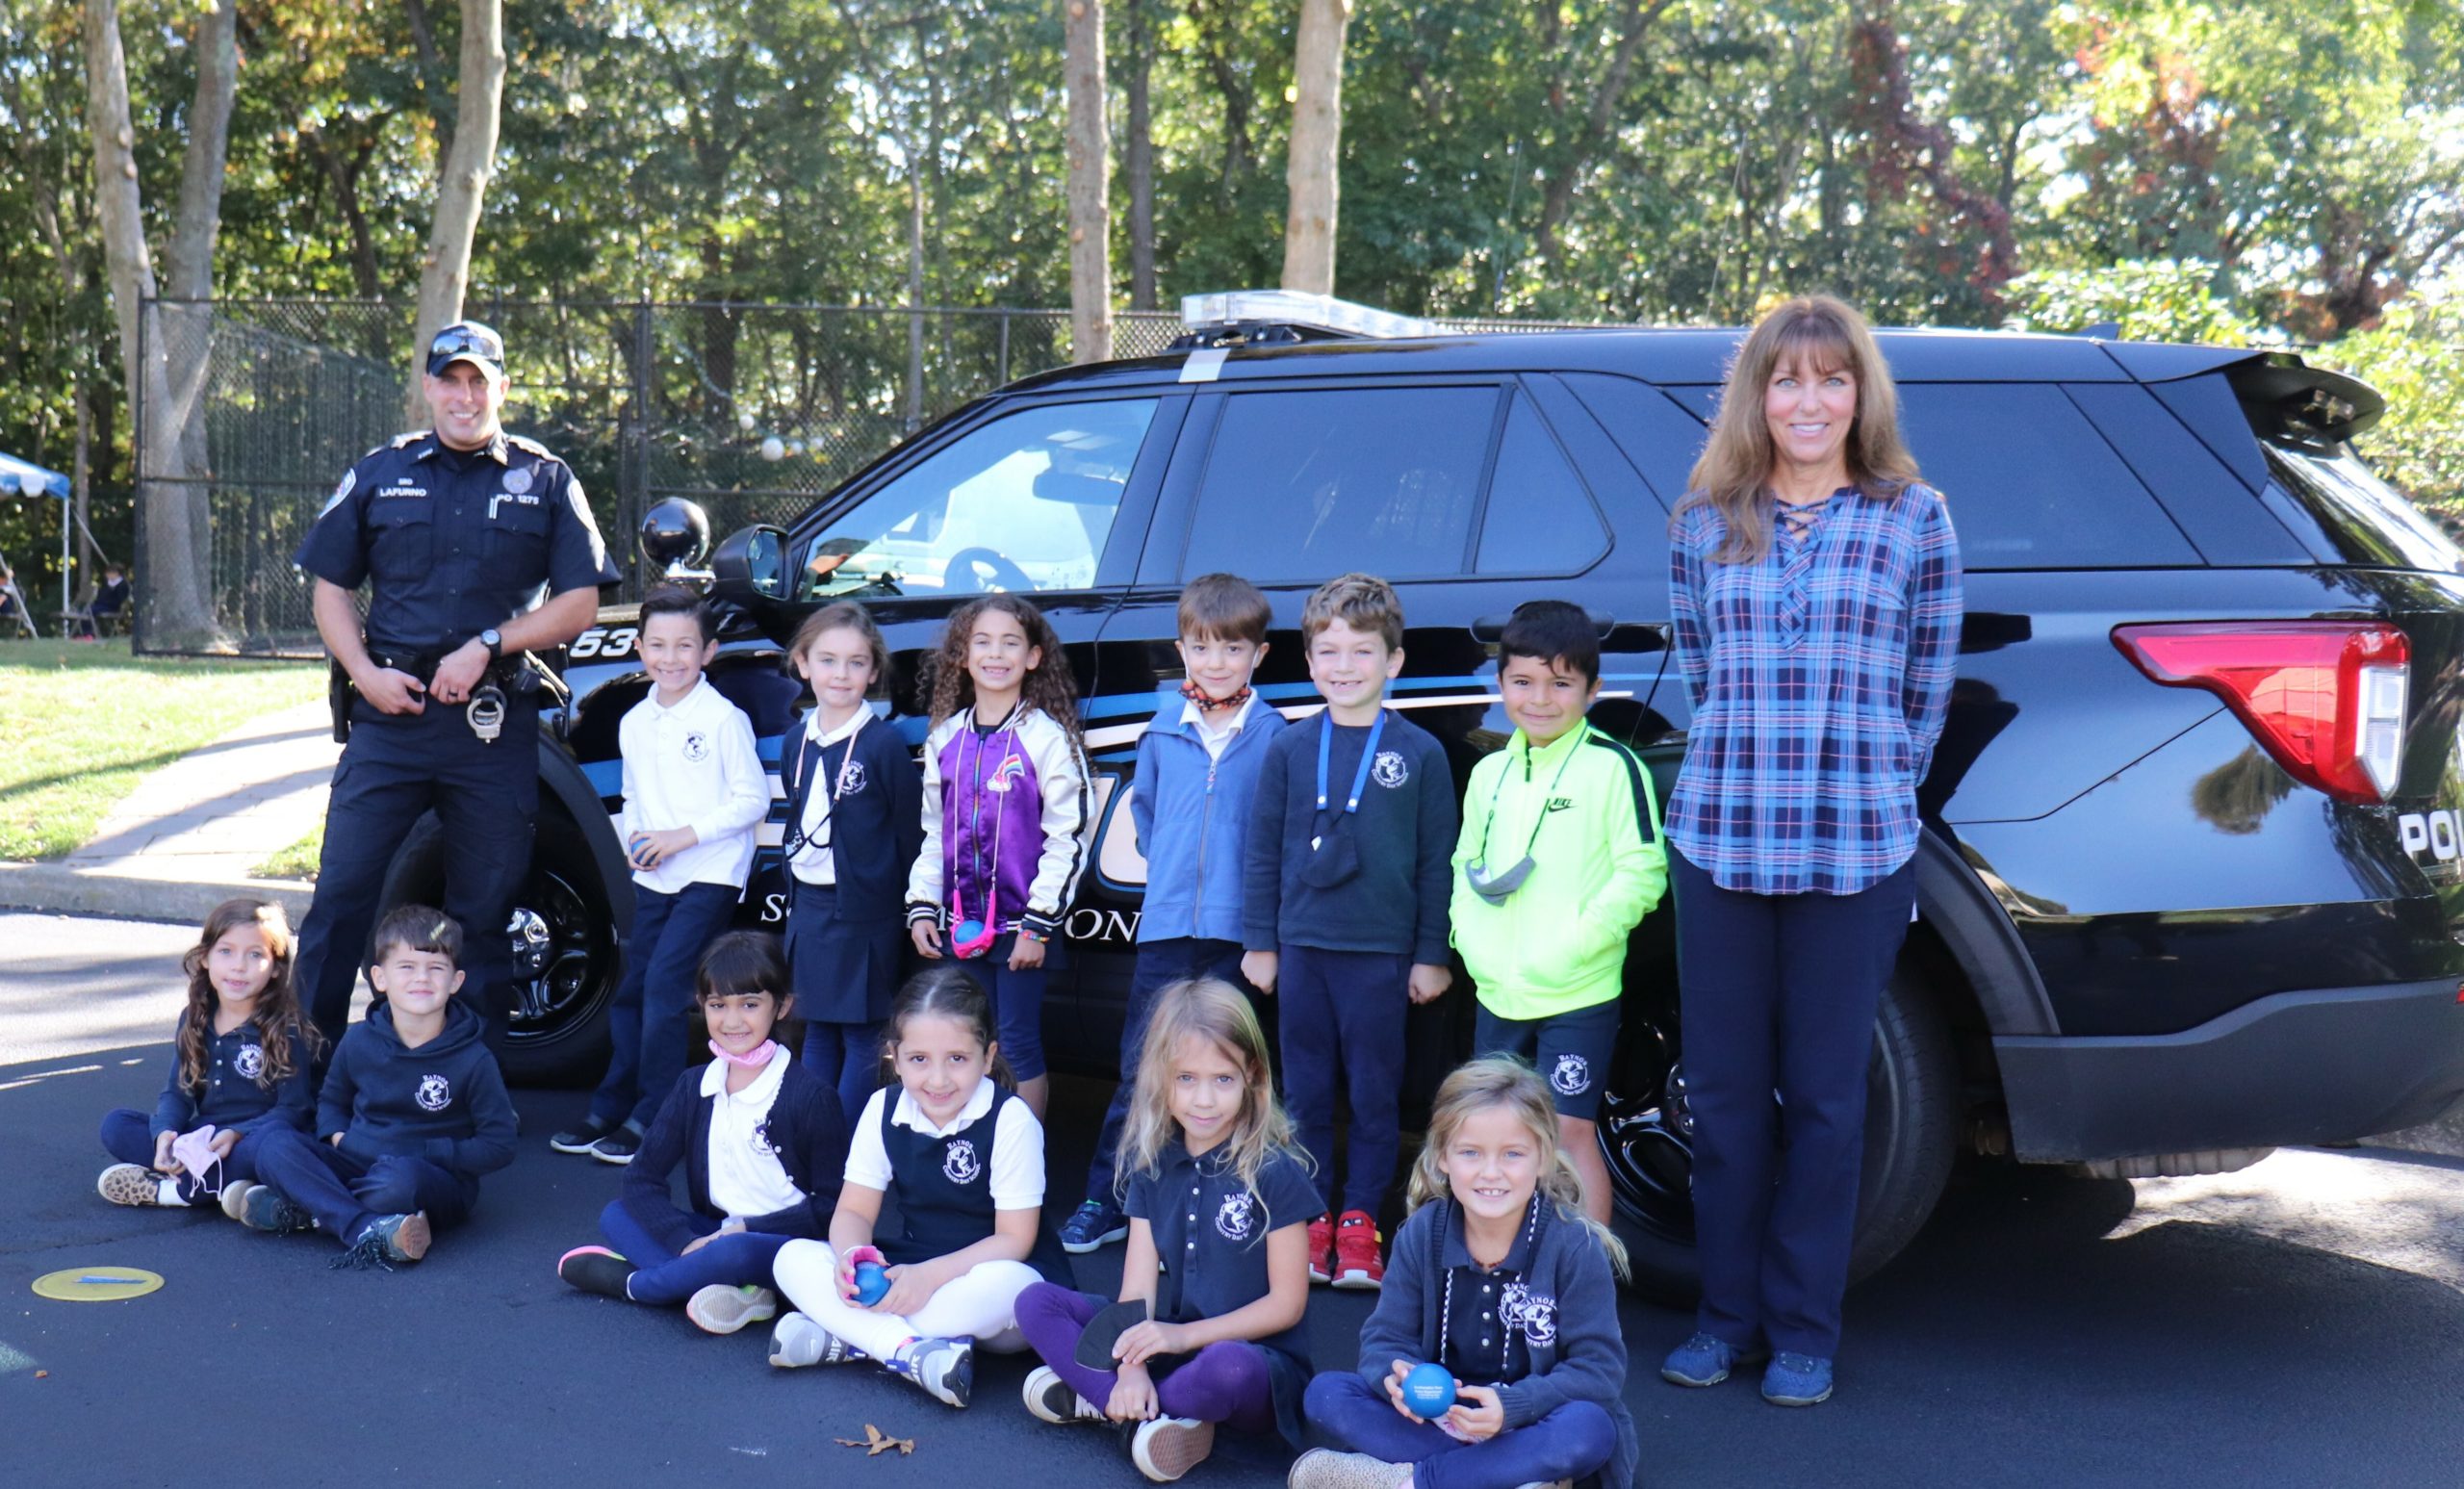 Officer Eugene LaFurno of the Southampton Town Police Department, and father of student Enzo LaFurno, visited with the students of Raynor Country Day School last week.  During his visit, Officer LaFurno reinforced the concept of 